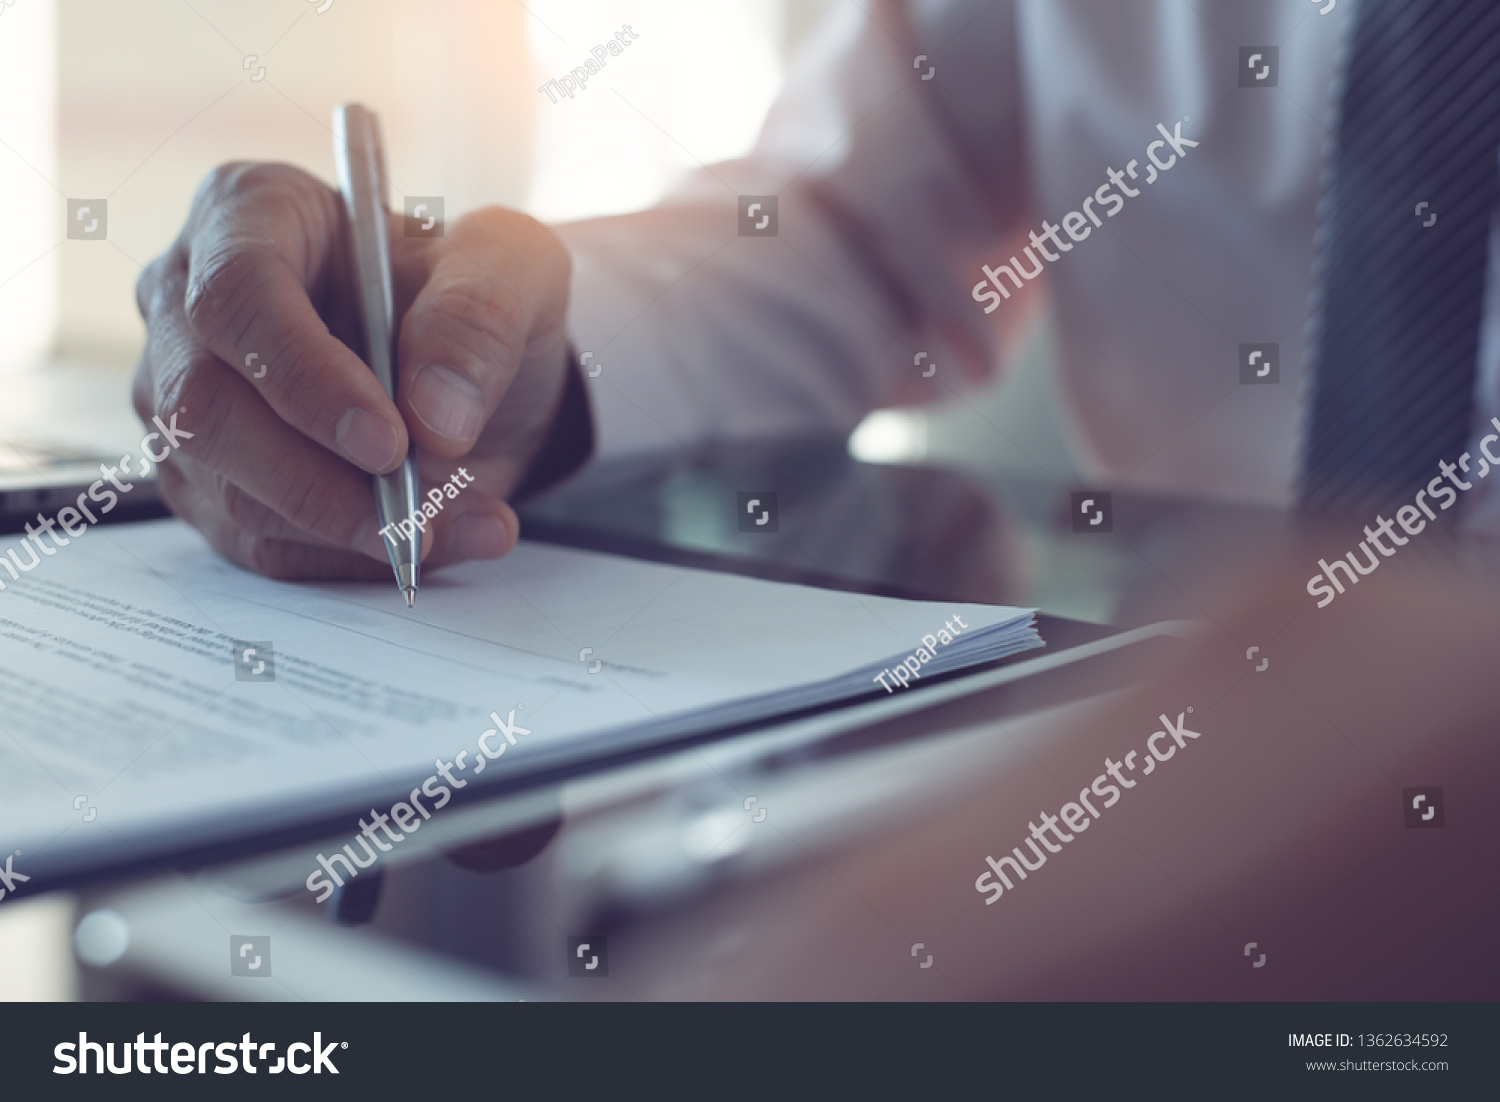 Signing contract, business agreement, deal concept. Business man signing official contract, formal document with a pen and digital tablet computer on desk in office with morning sunlight, close up #1362634592